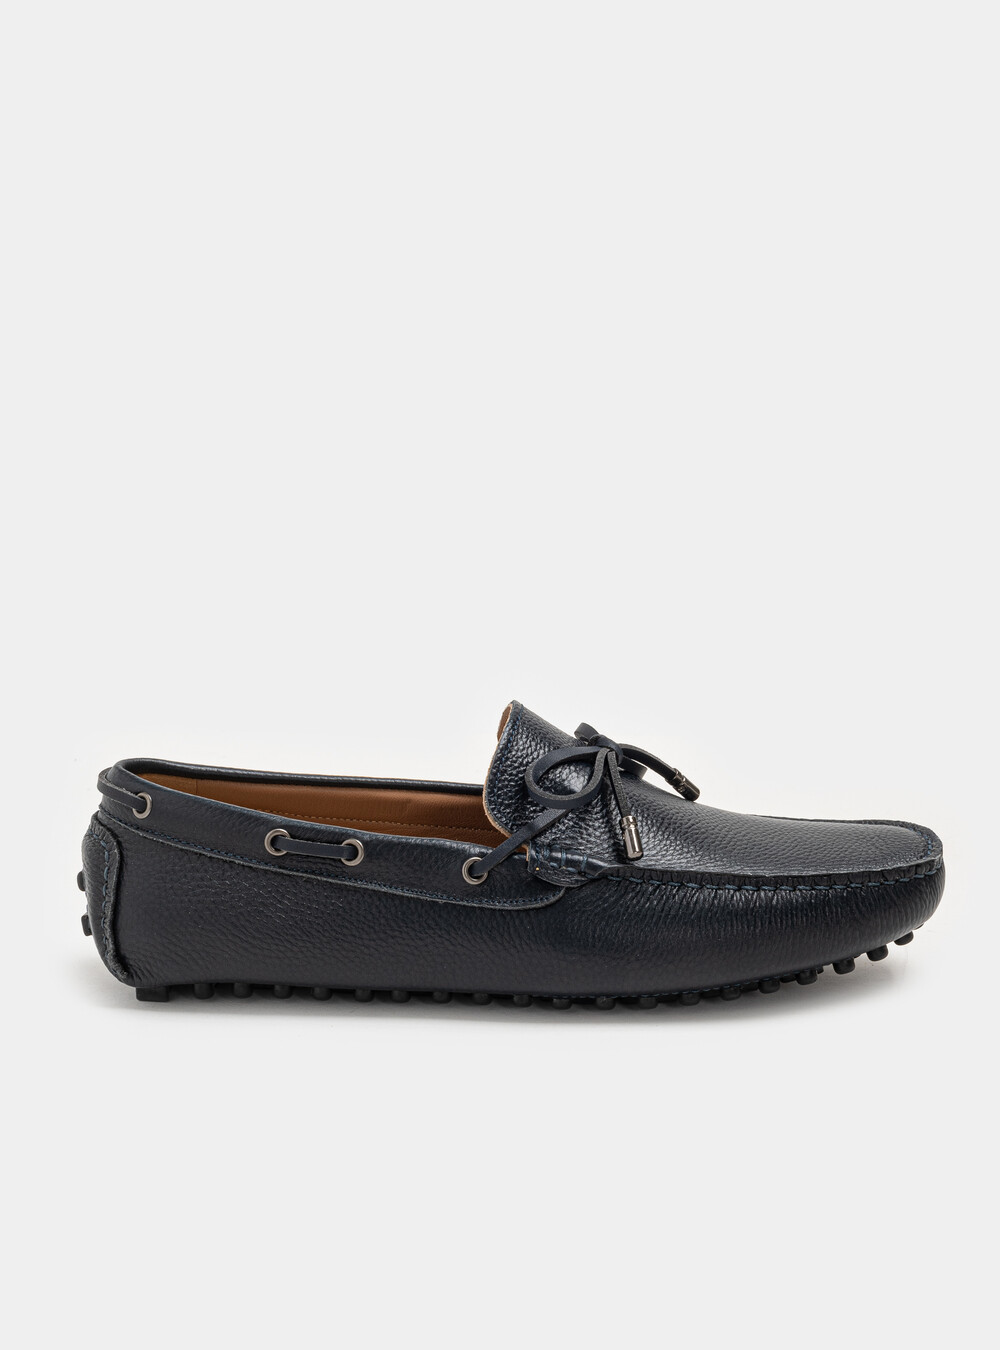 Leather boat moccasins | GutteridgeUS | Casual Shoes Uomo